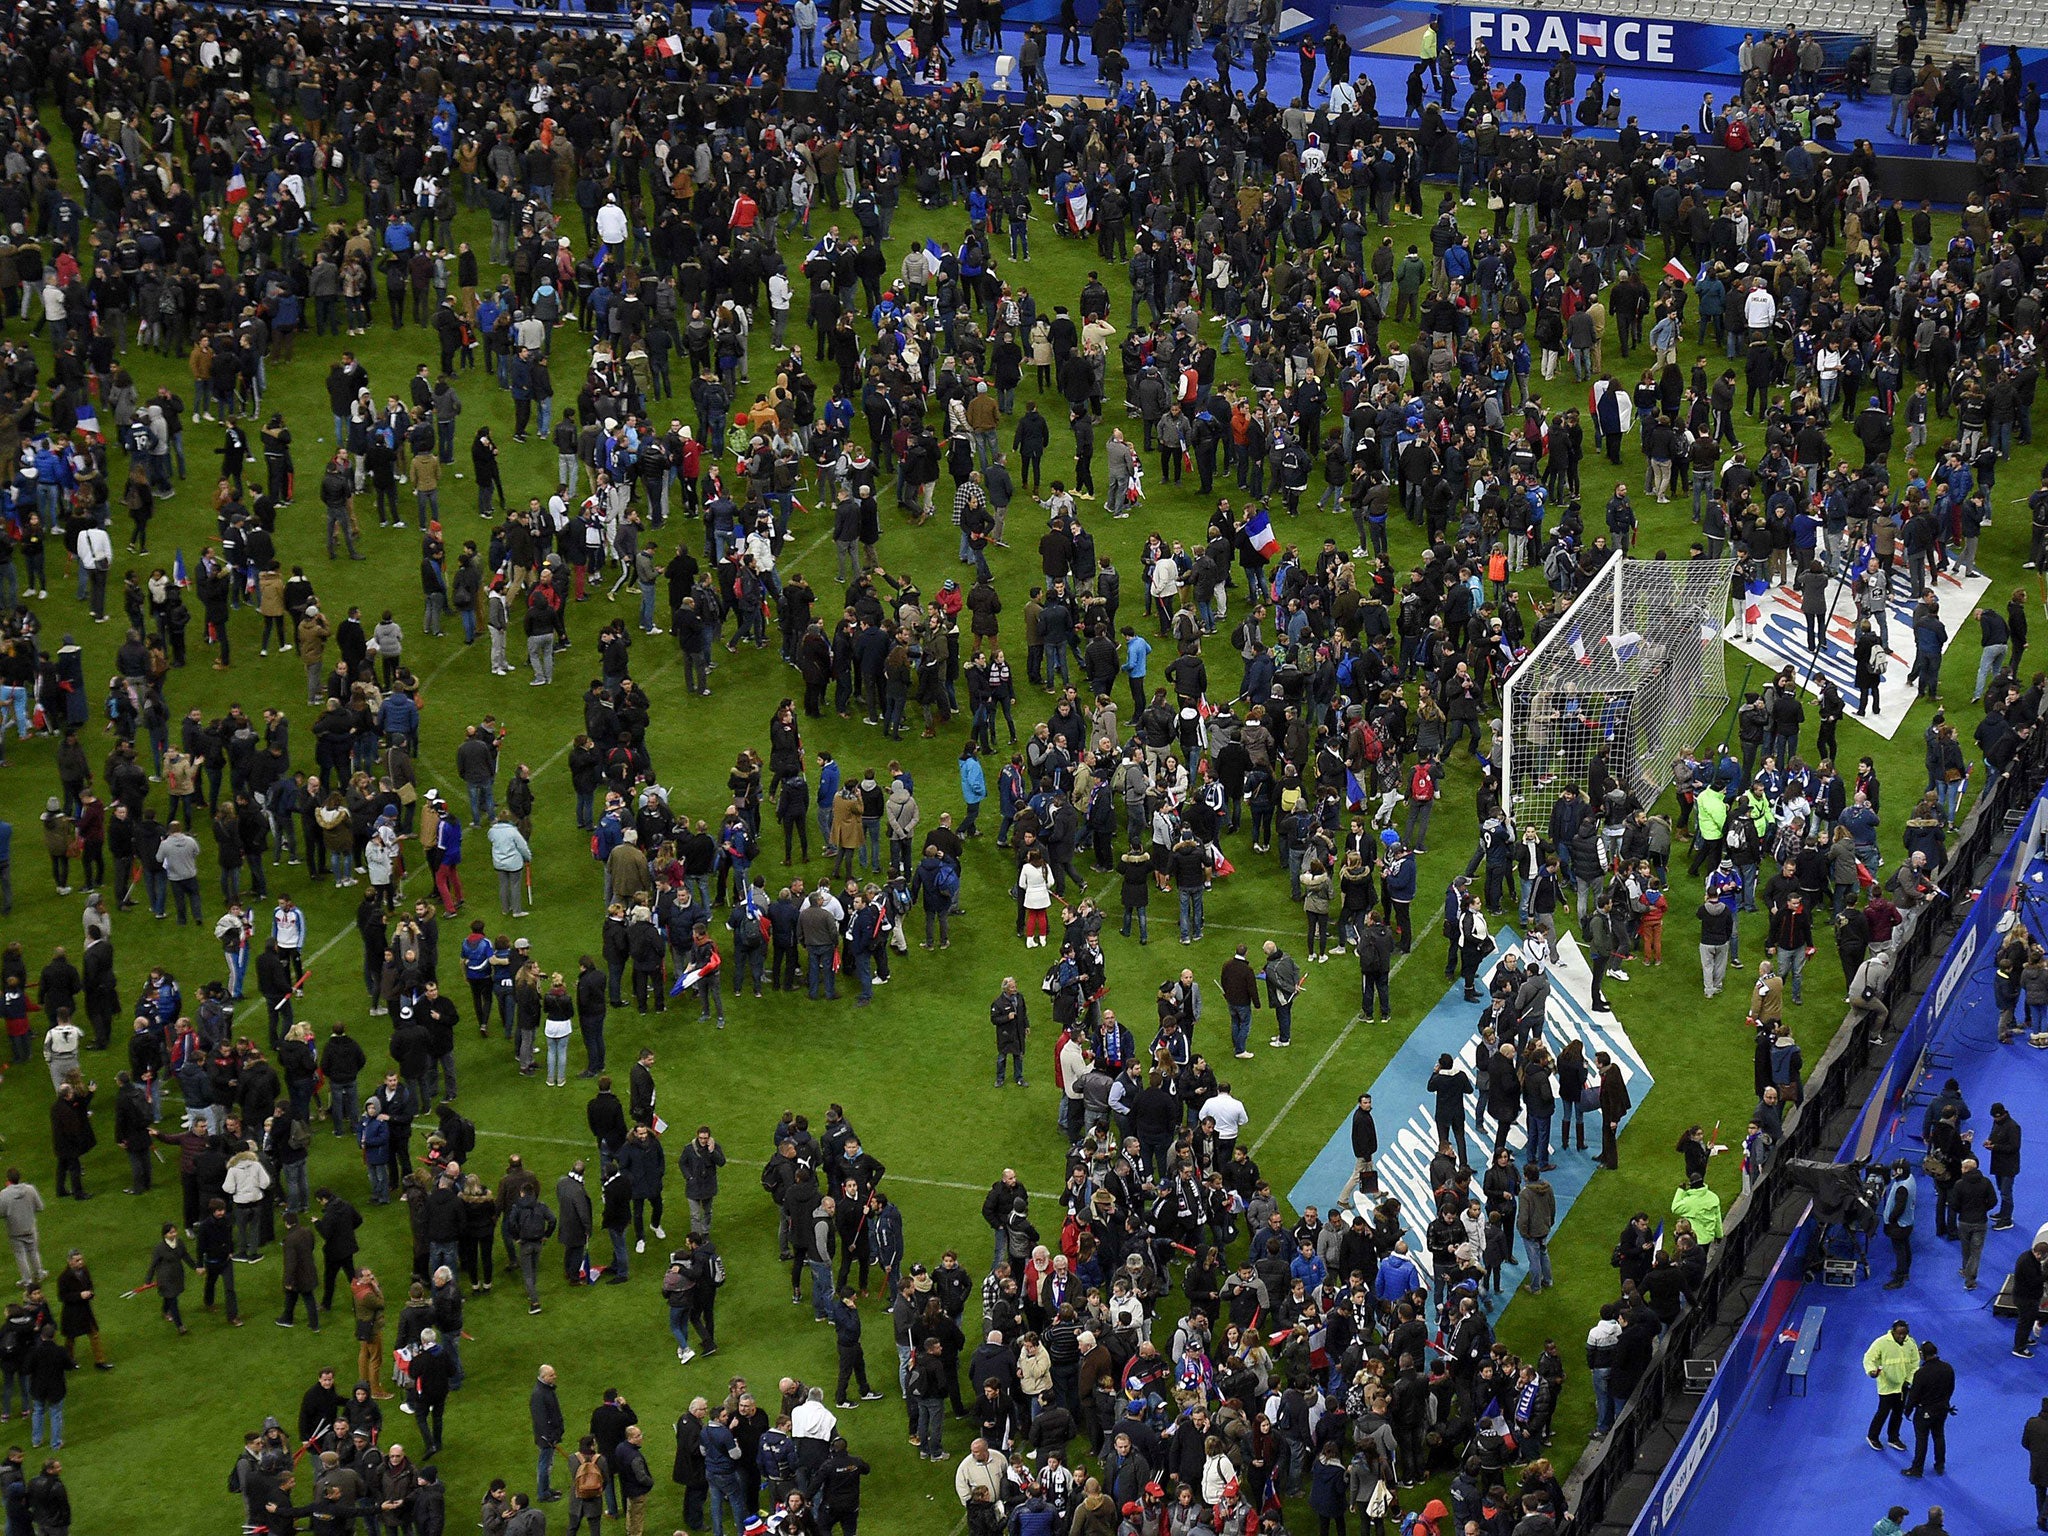 Fans at the Stade de France gather on the pitch after the Paris attacks